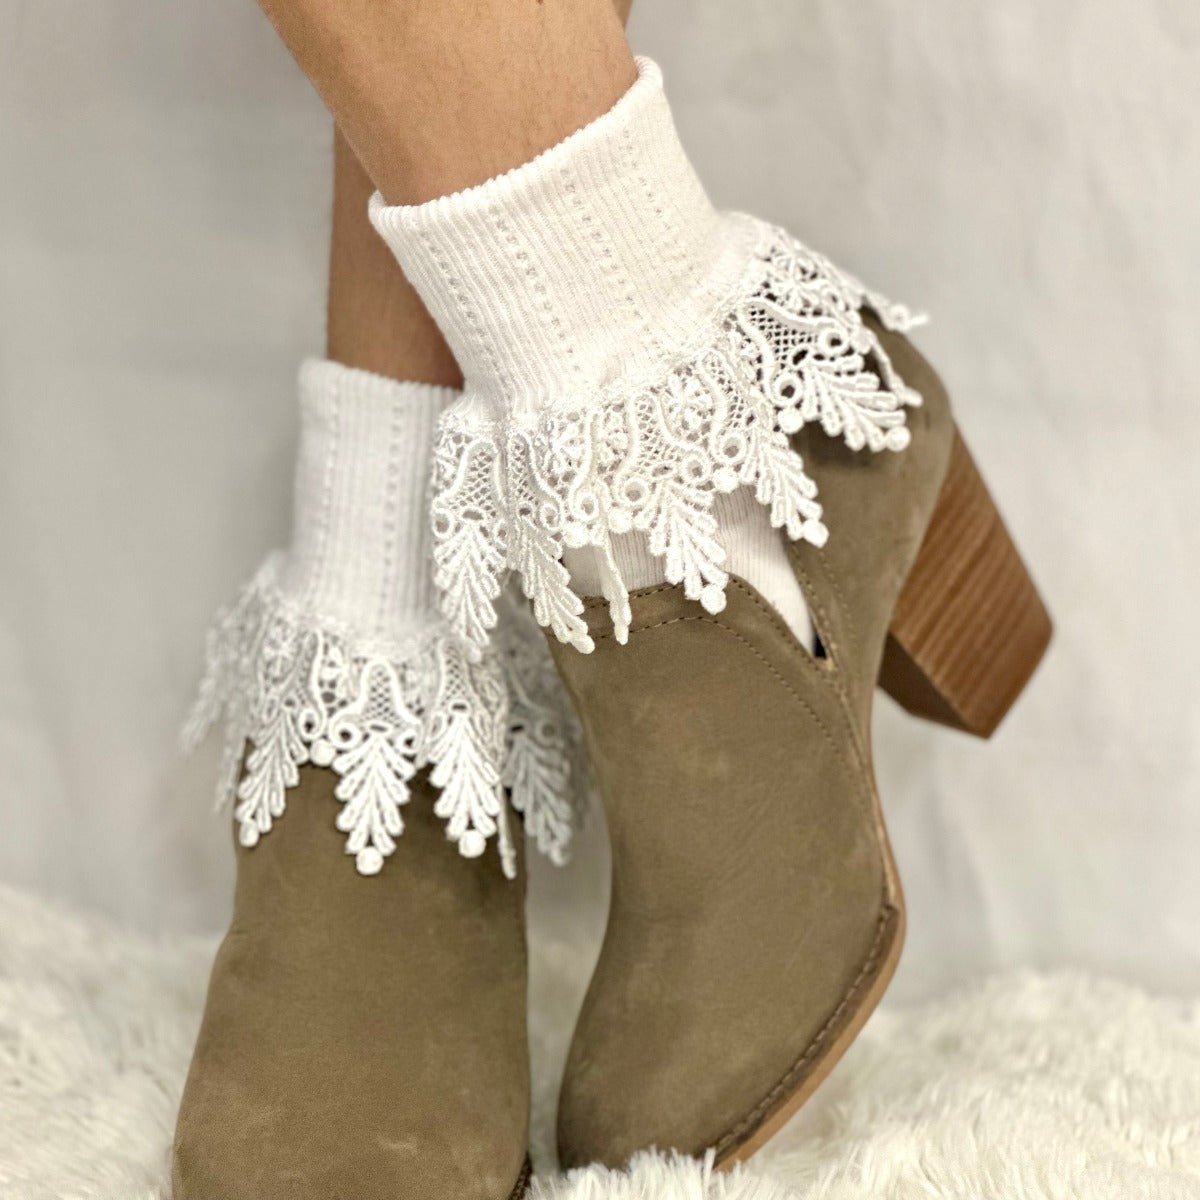 Designer socks and barefoot sandals for women – Catherine Cole